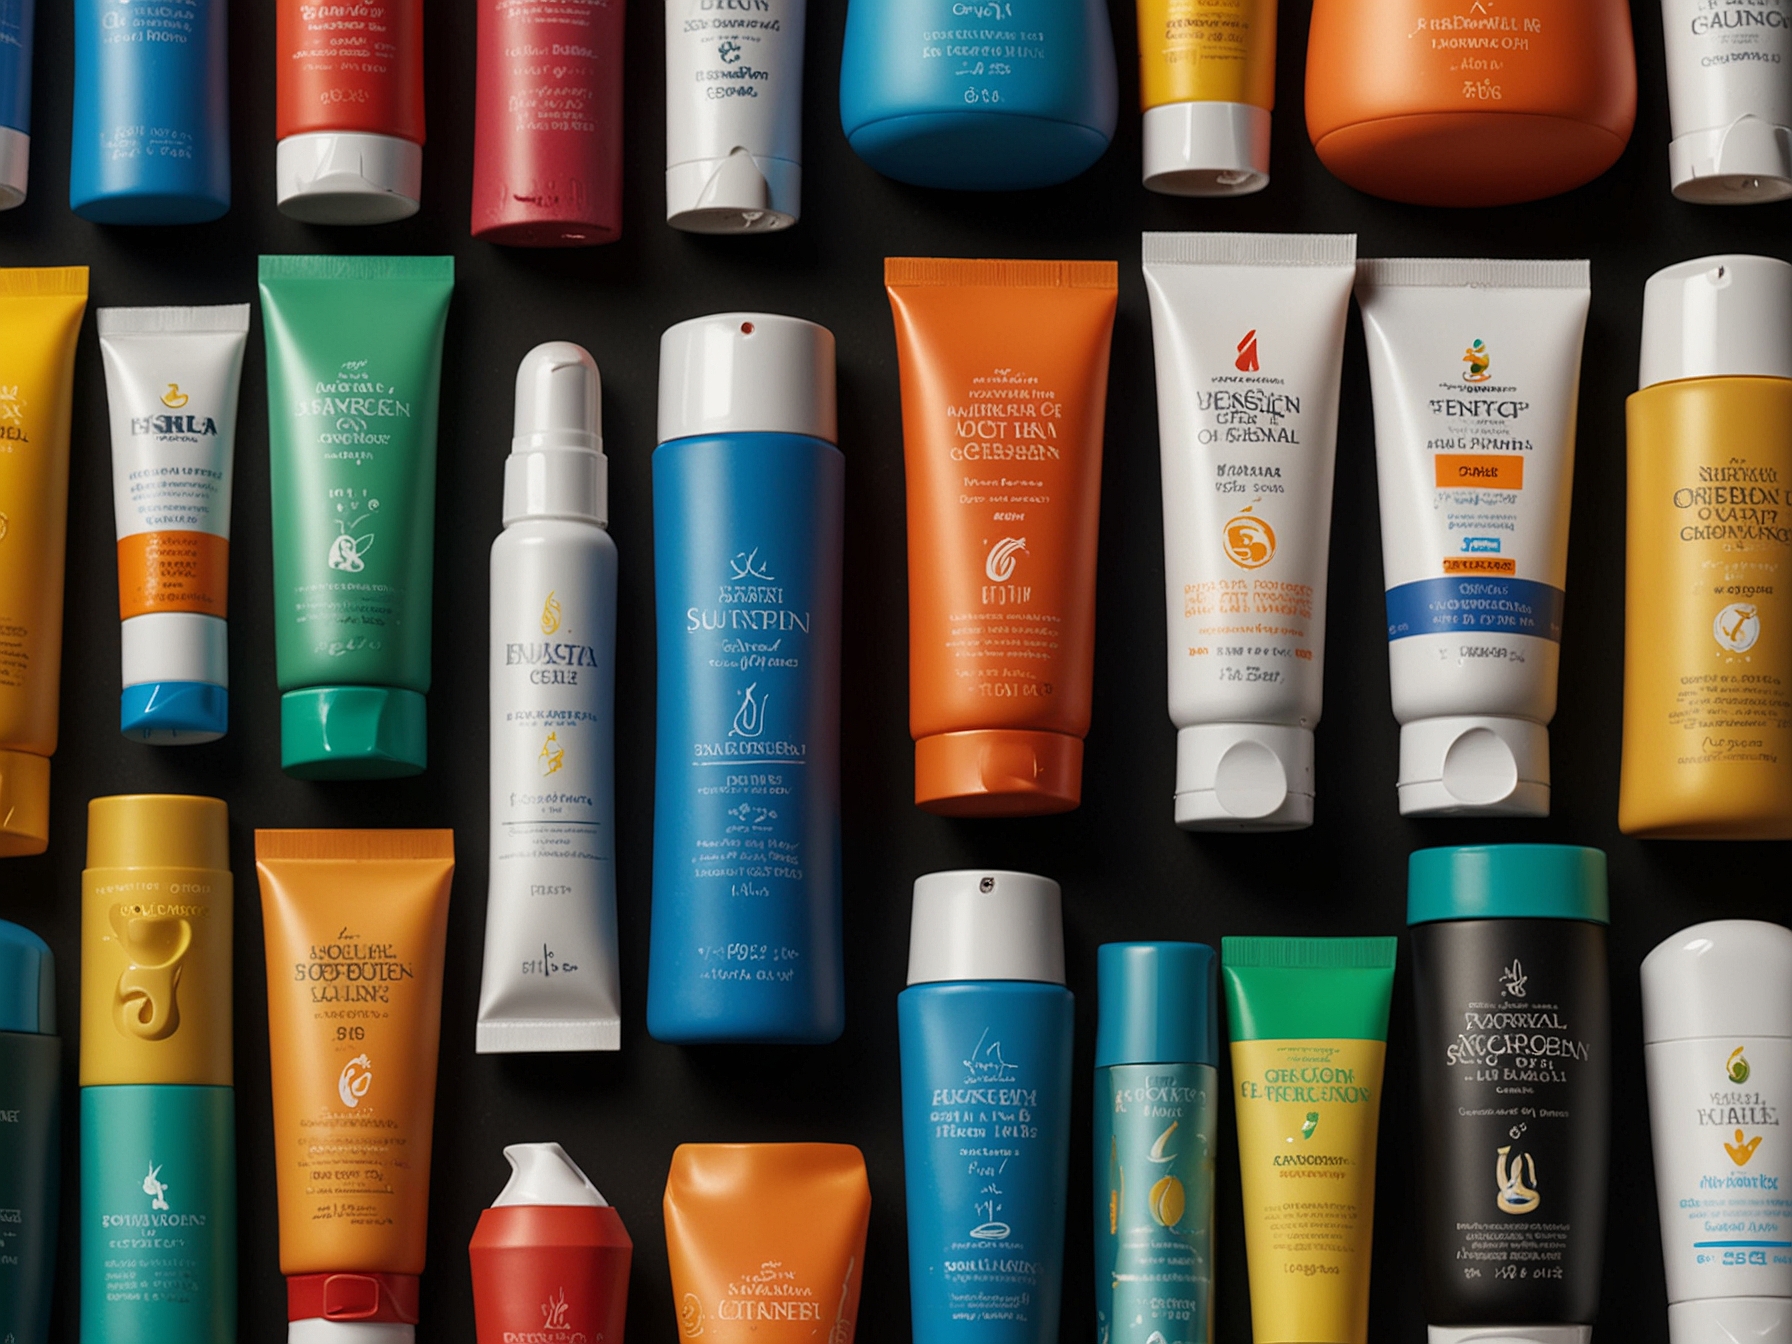 A variety of sunscreen products arranged on a table, highlighting both high-cost brands and budget-friendly options. This image represents the spectrum of sunscreens tested by Which? in their recent study.